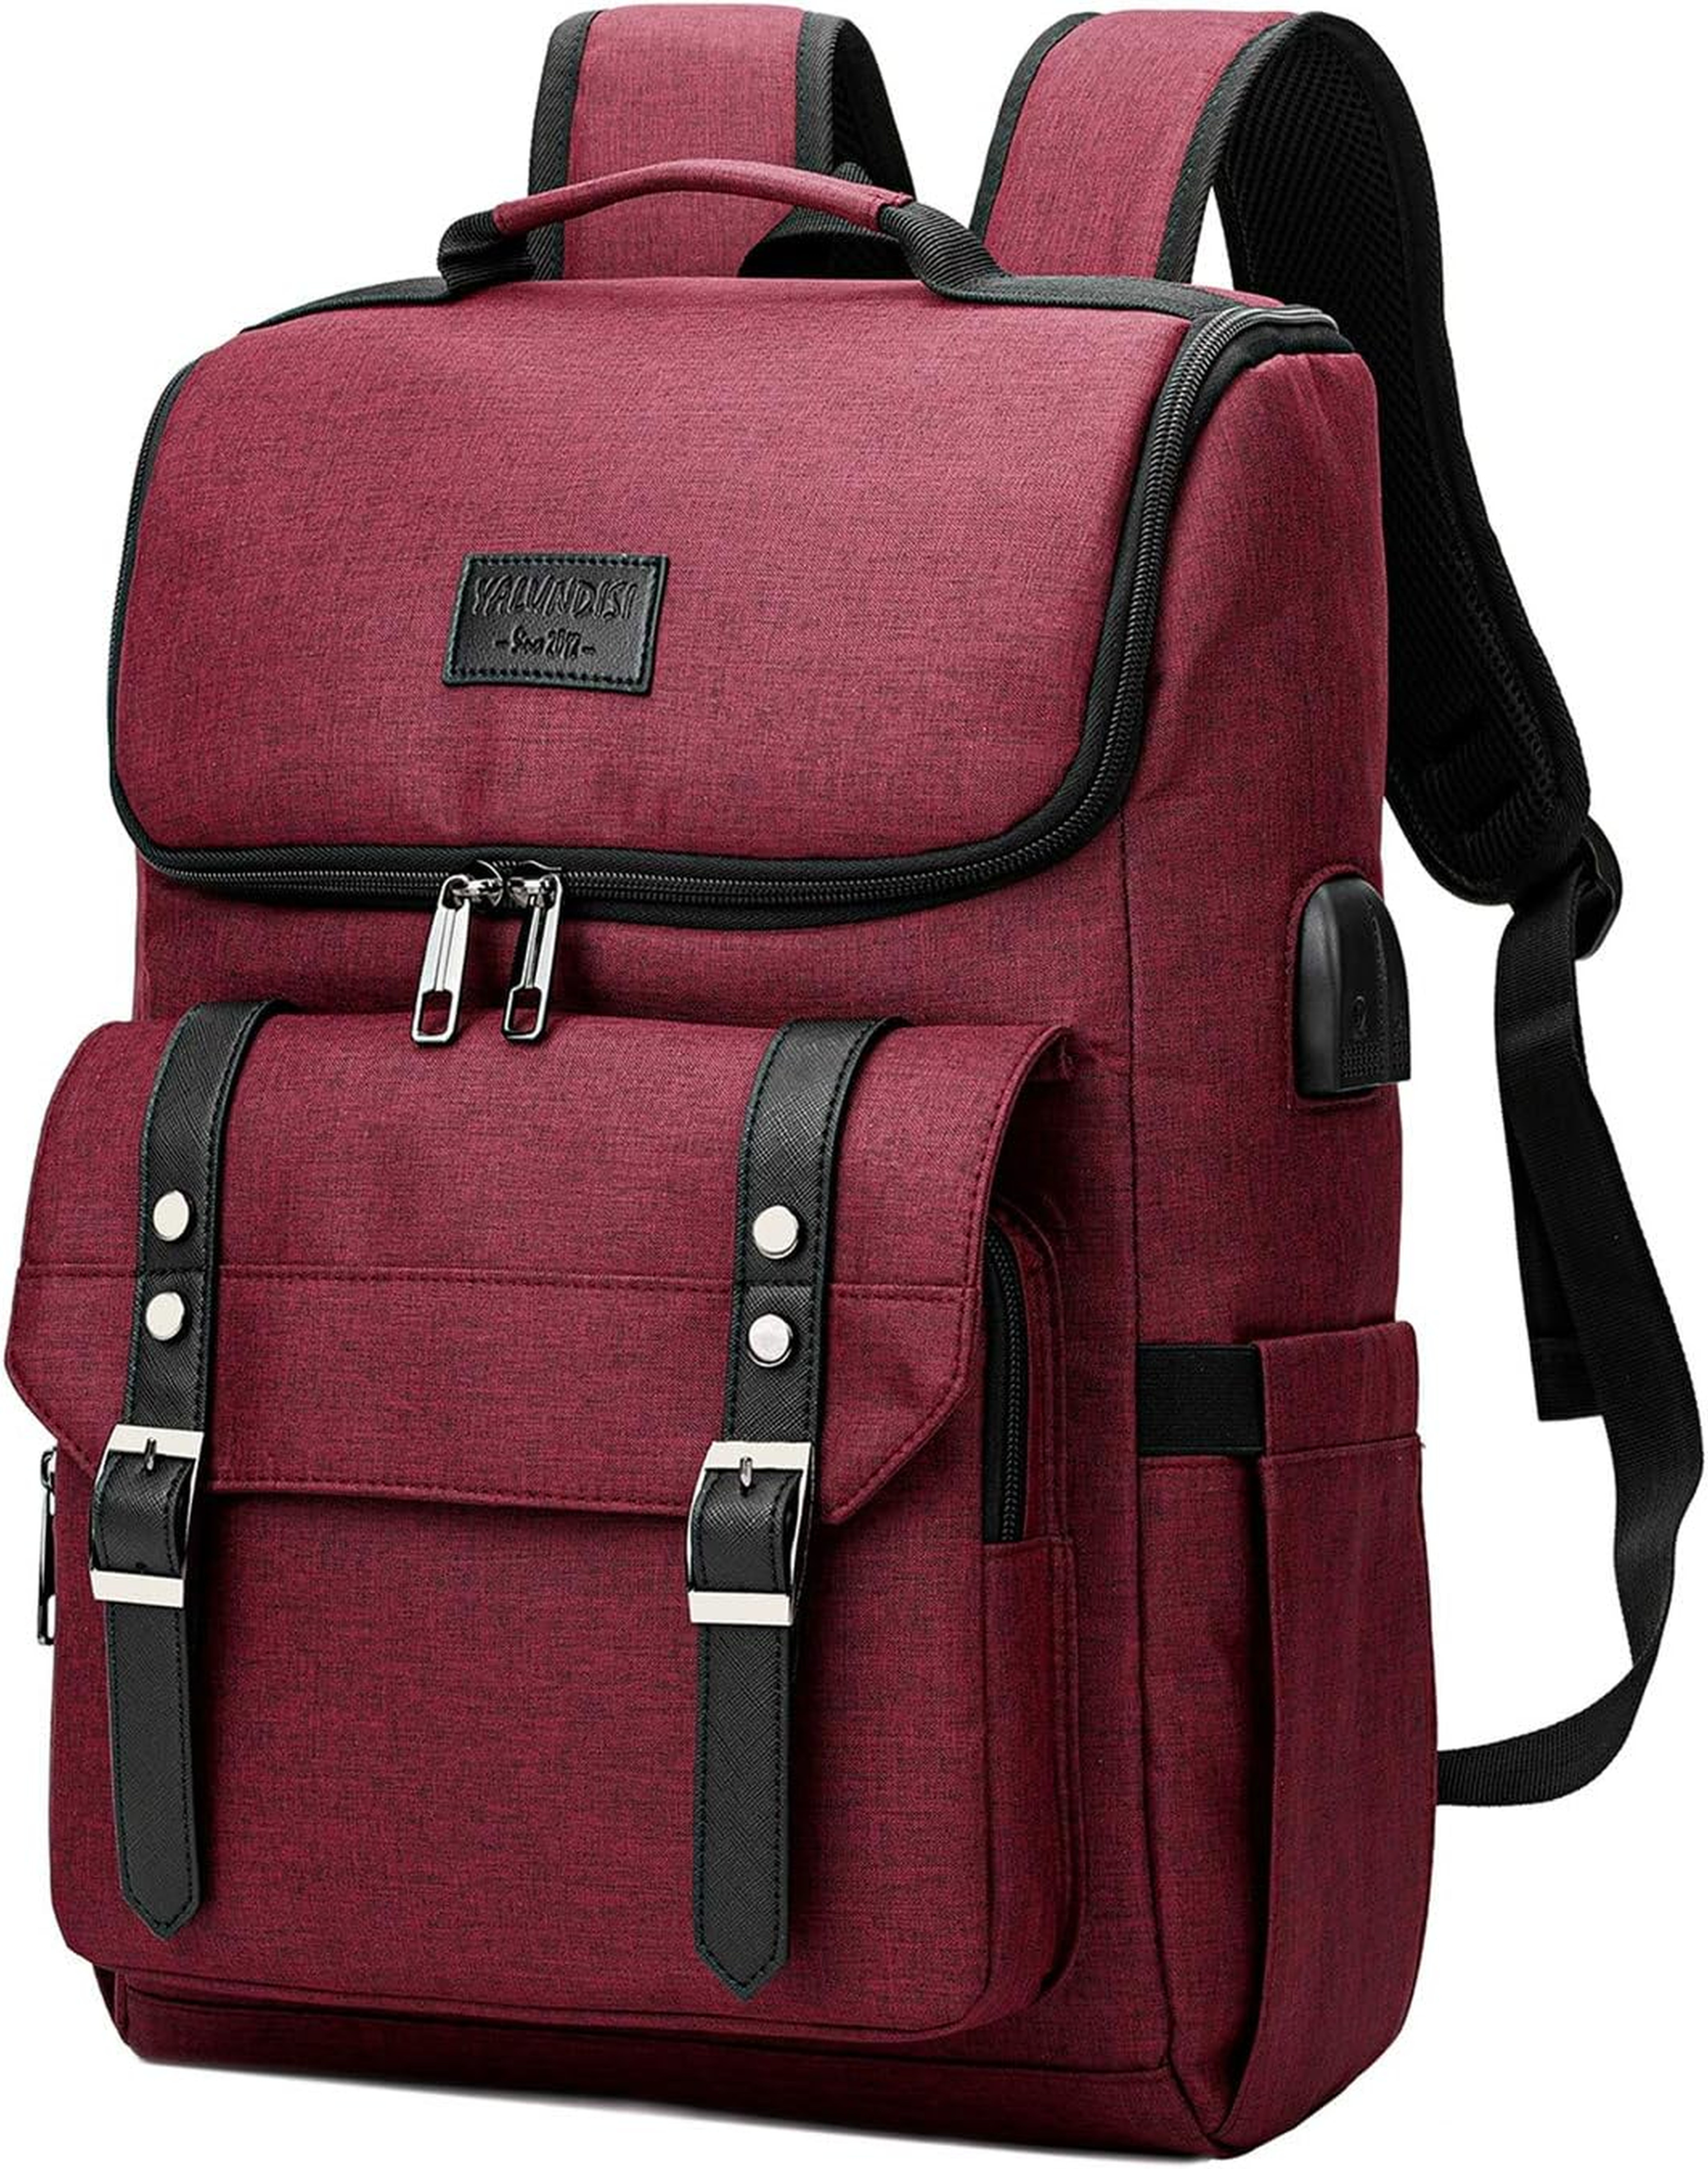 Wine-red backpack with black accents, with front flap pocket and side pockets